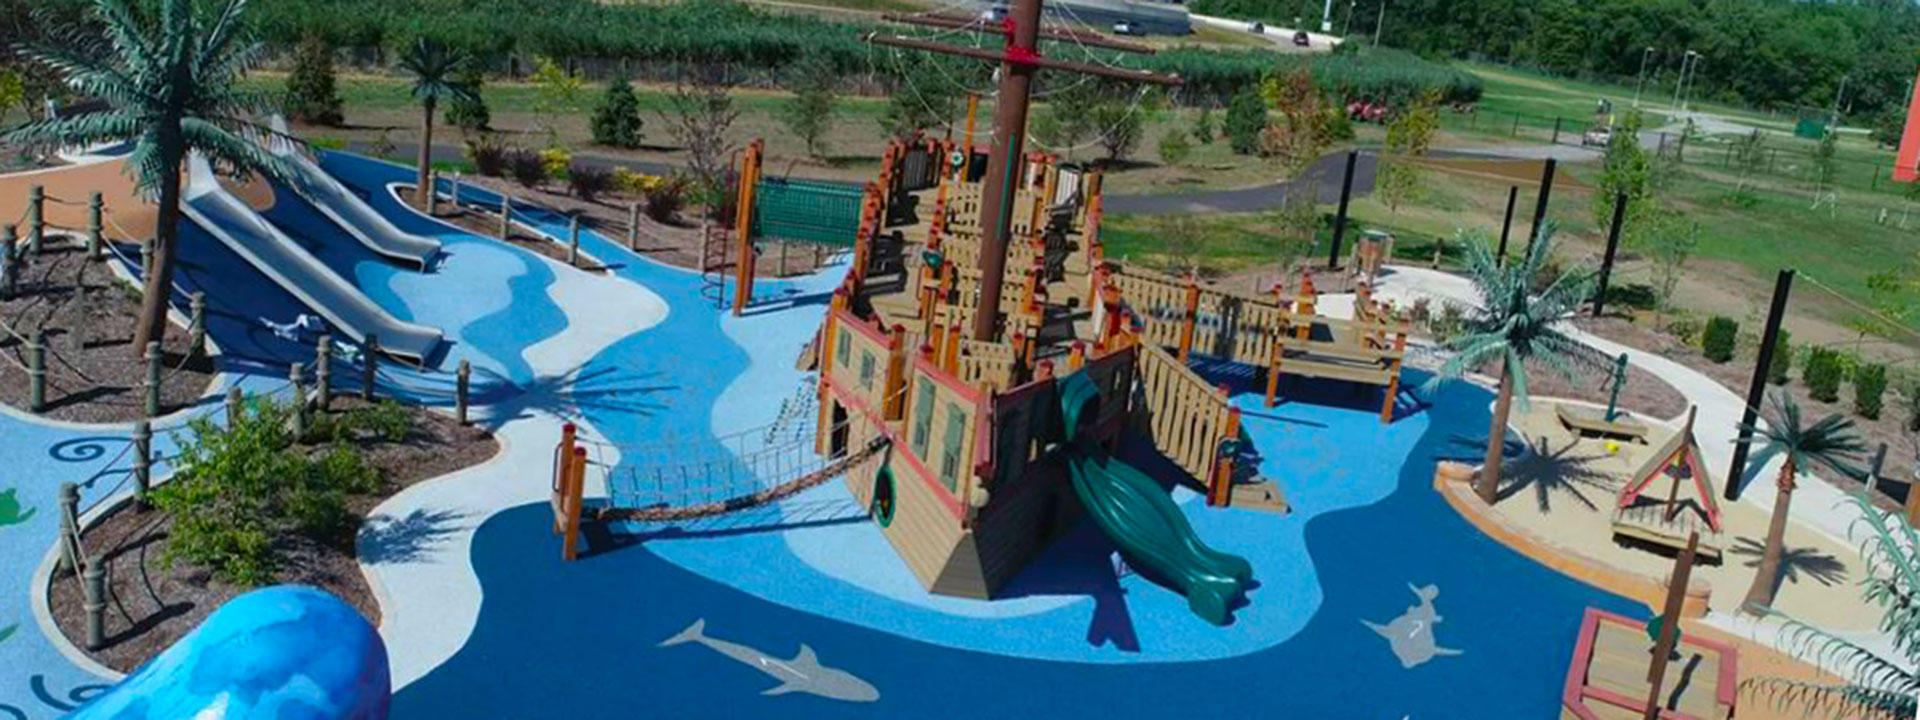 Access Pass cultural attraction Bellaboo's Imagination Garden play area with a pirate ship surrounded by blue landscaping that looks like water.